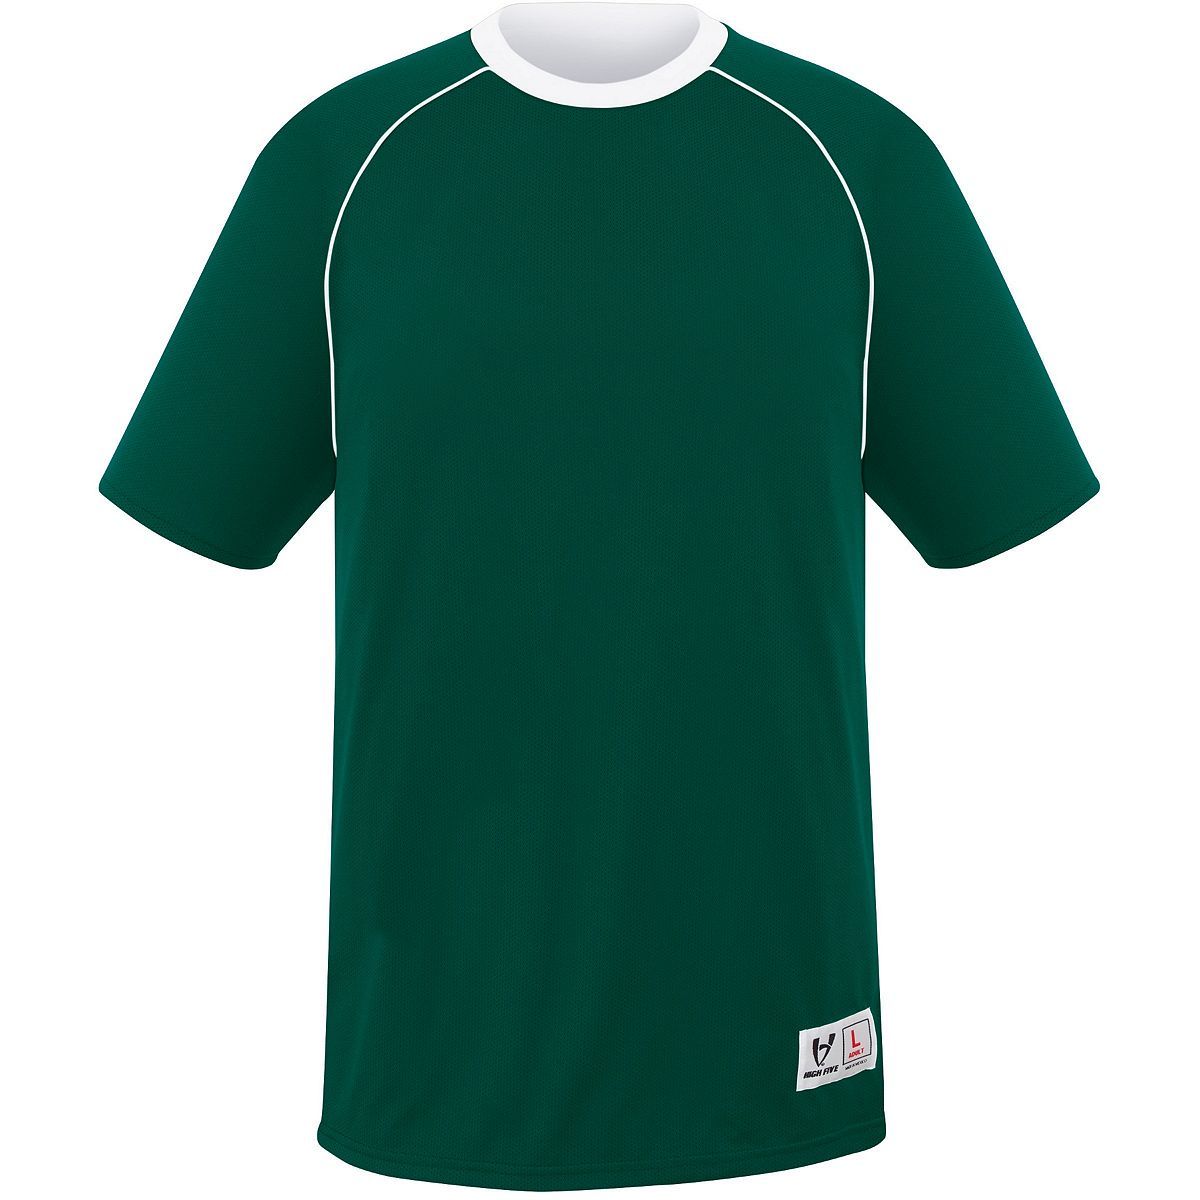 High 5 Conversion Reversible Jersey in Forest/White  -Part of the Adult, Adult-Jersey, High5-Products, Soccer, Shirts, All-Sports-1 product lines at KanaleyCreations.com